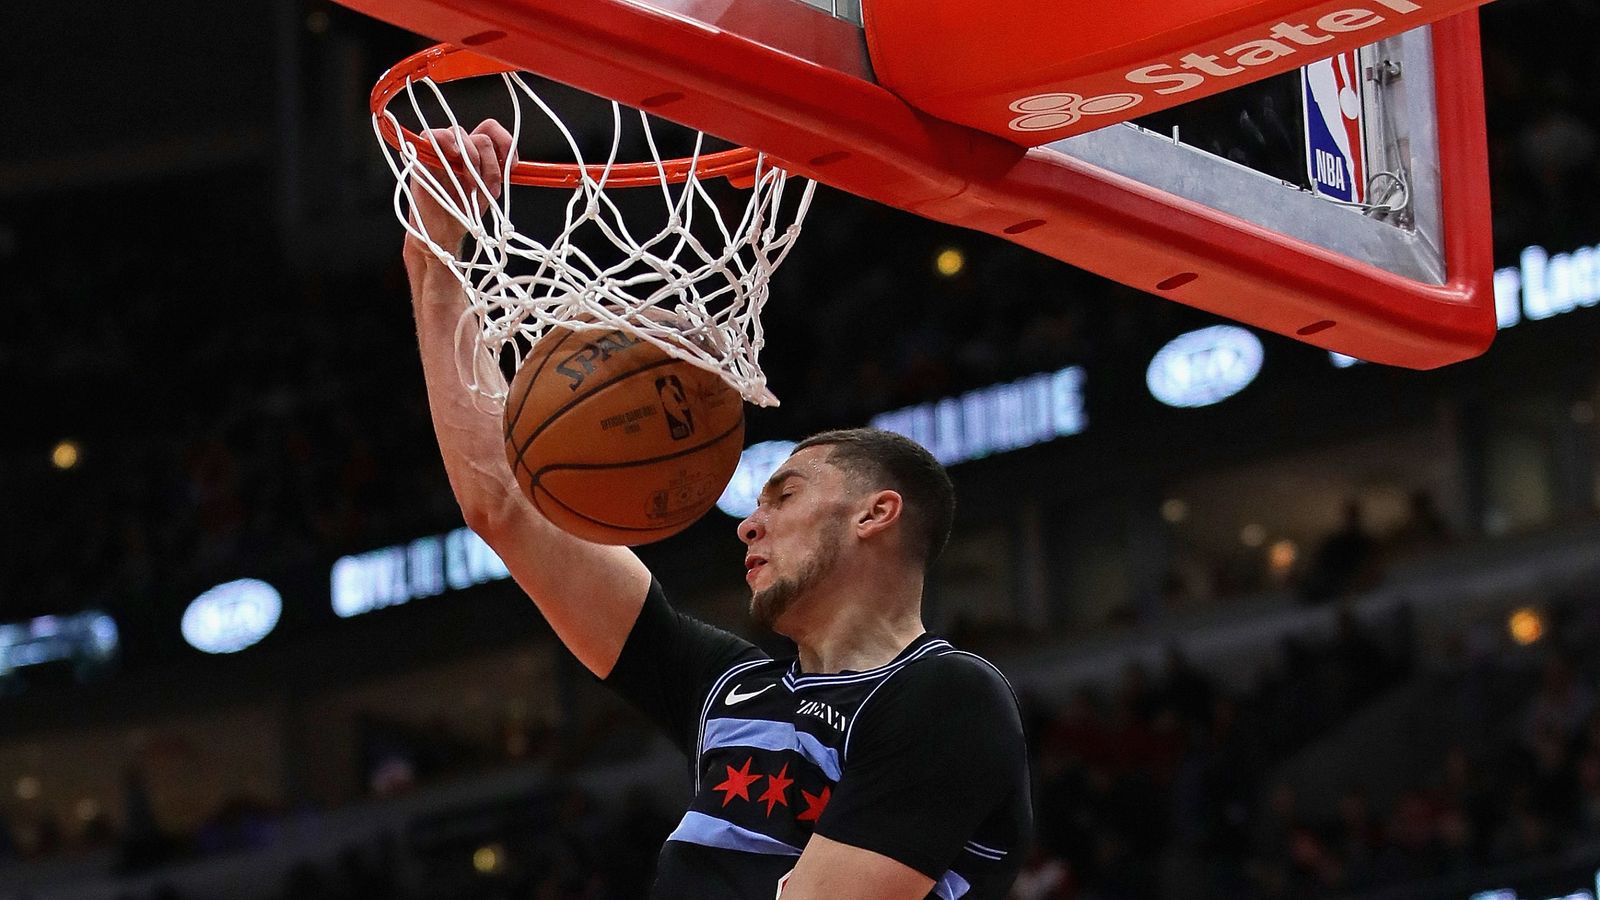 Zach LaVine had 14 points, 2 assists - Basketball Forever